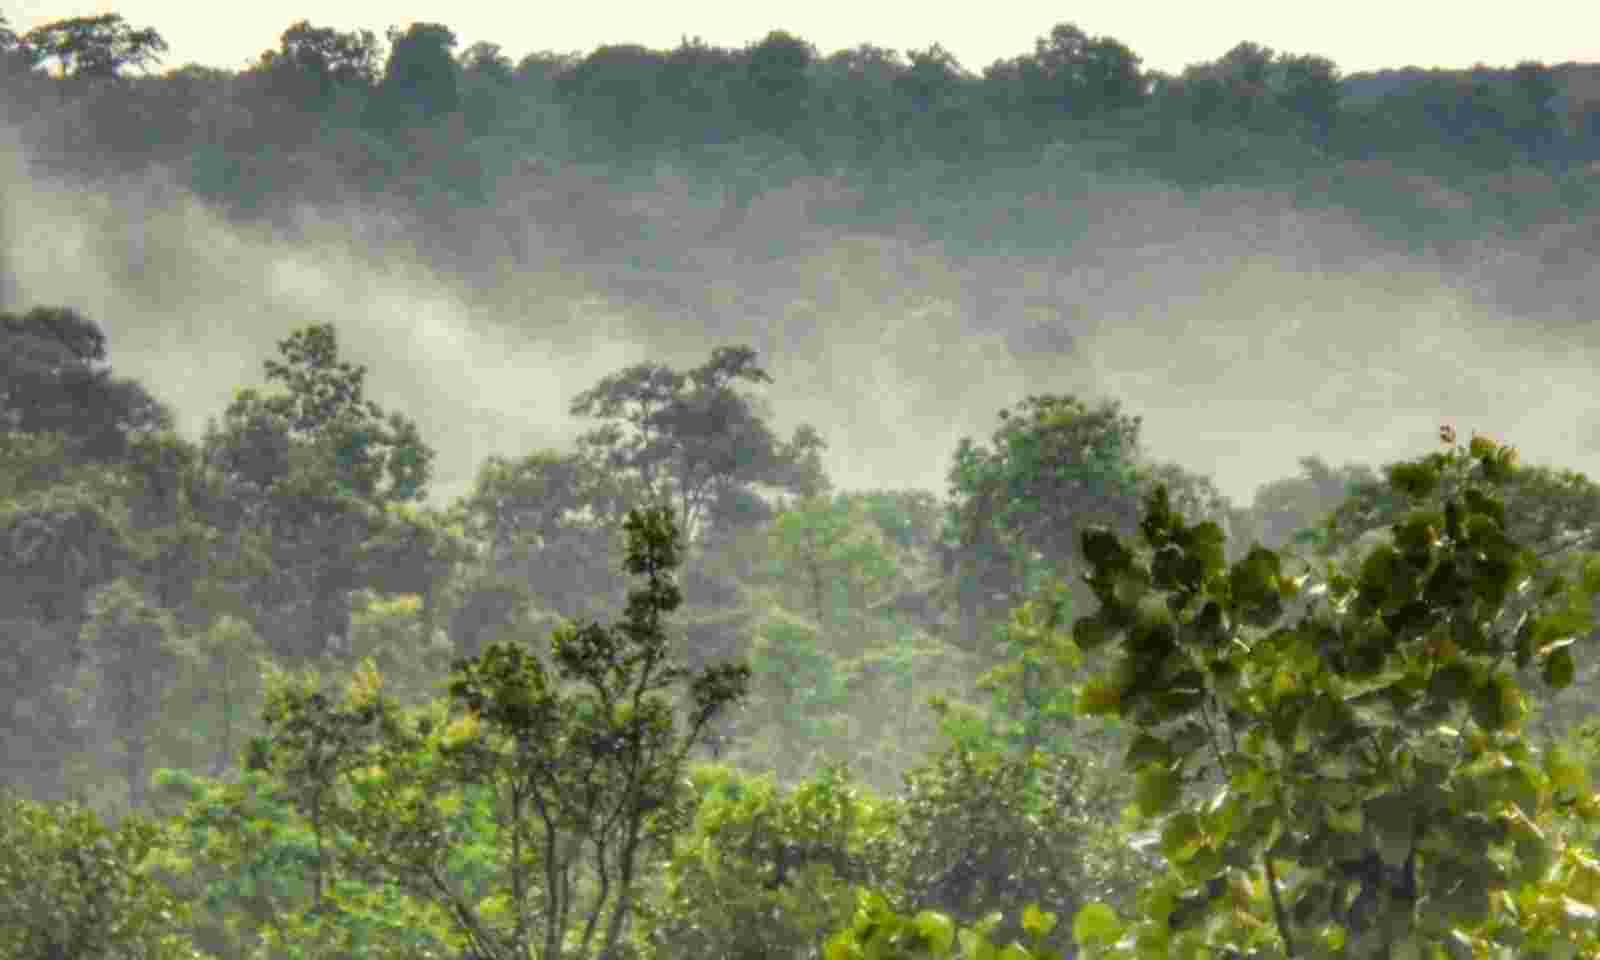 Chhattisgarh becomes 1st state to recognise Forest Resource Rights